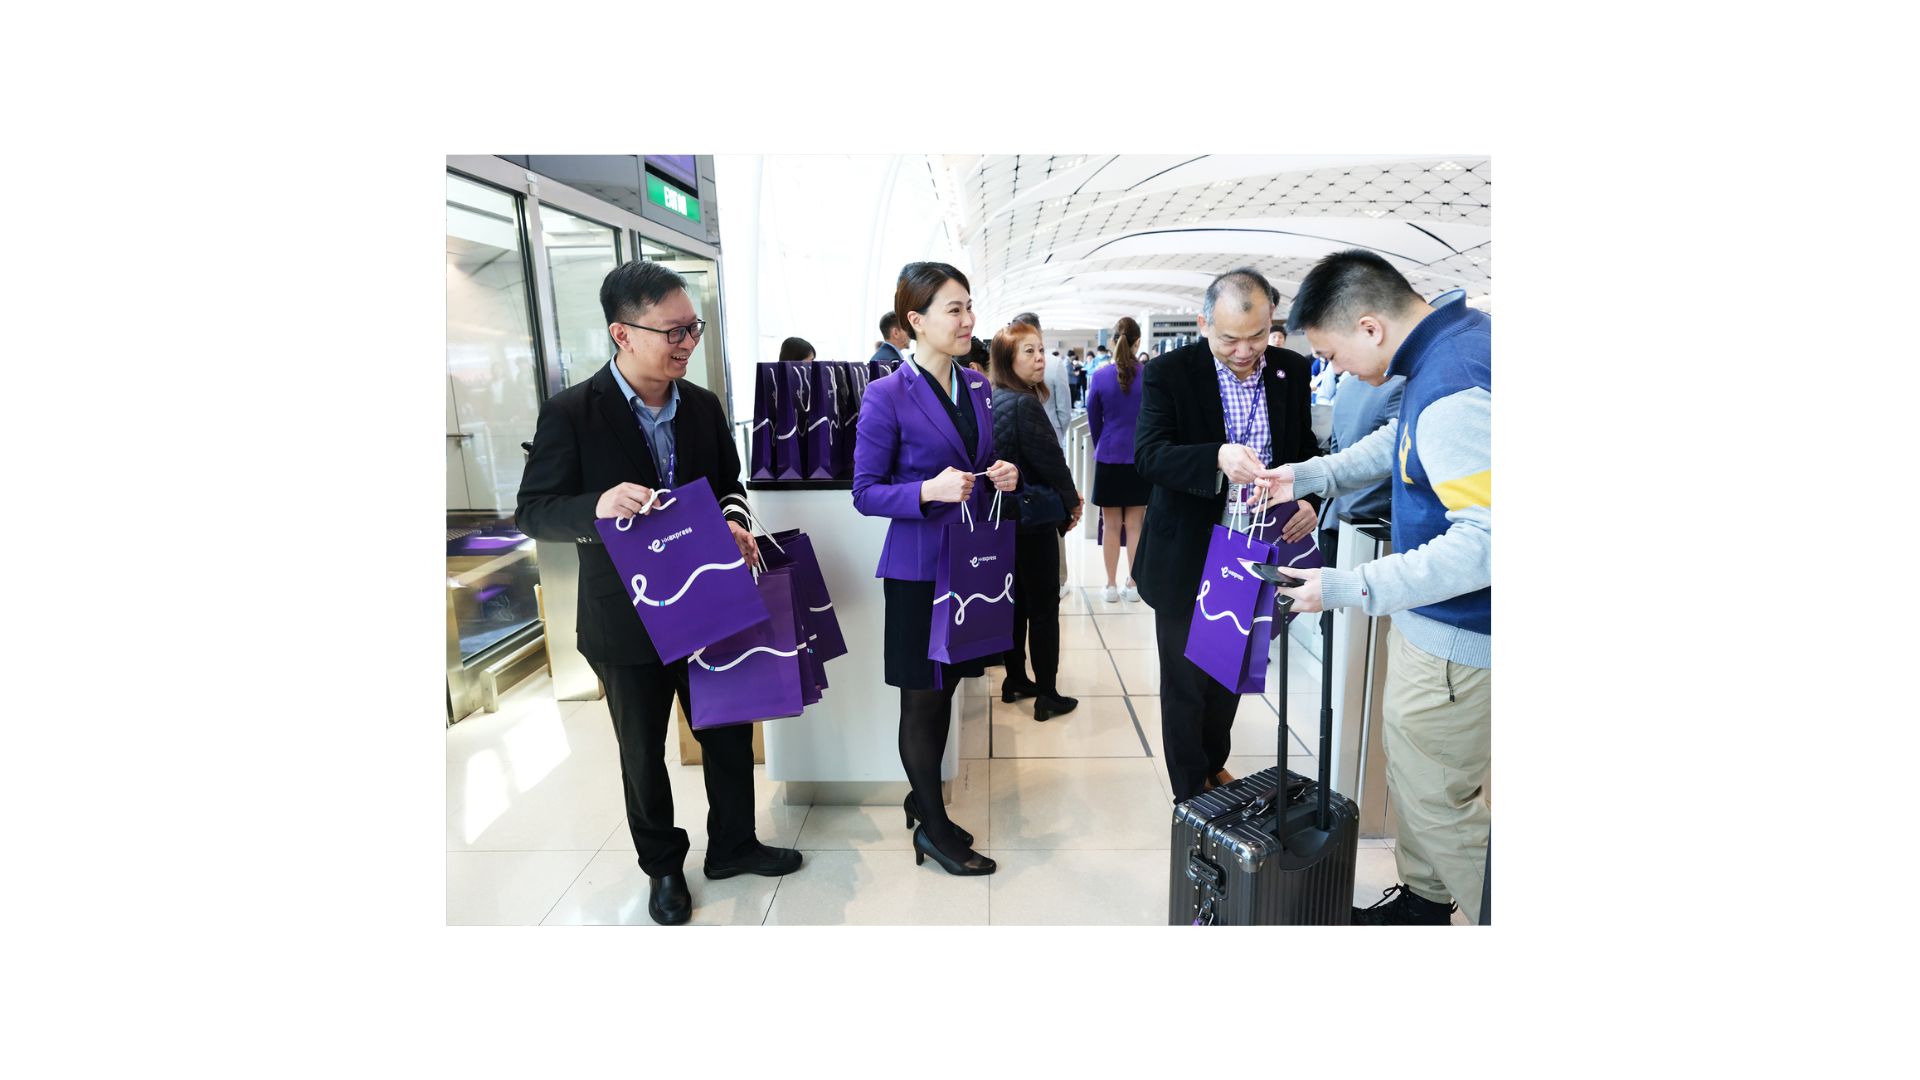 HK Express leadership team distributed souvenirs to passengers at Hong Kong International Airport to celebrate the inaugural flight of the airline's new Beijing Daxing route